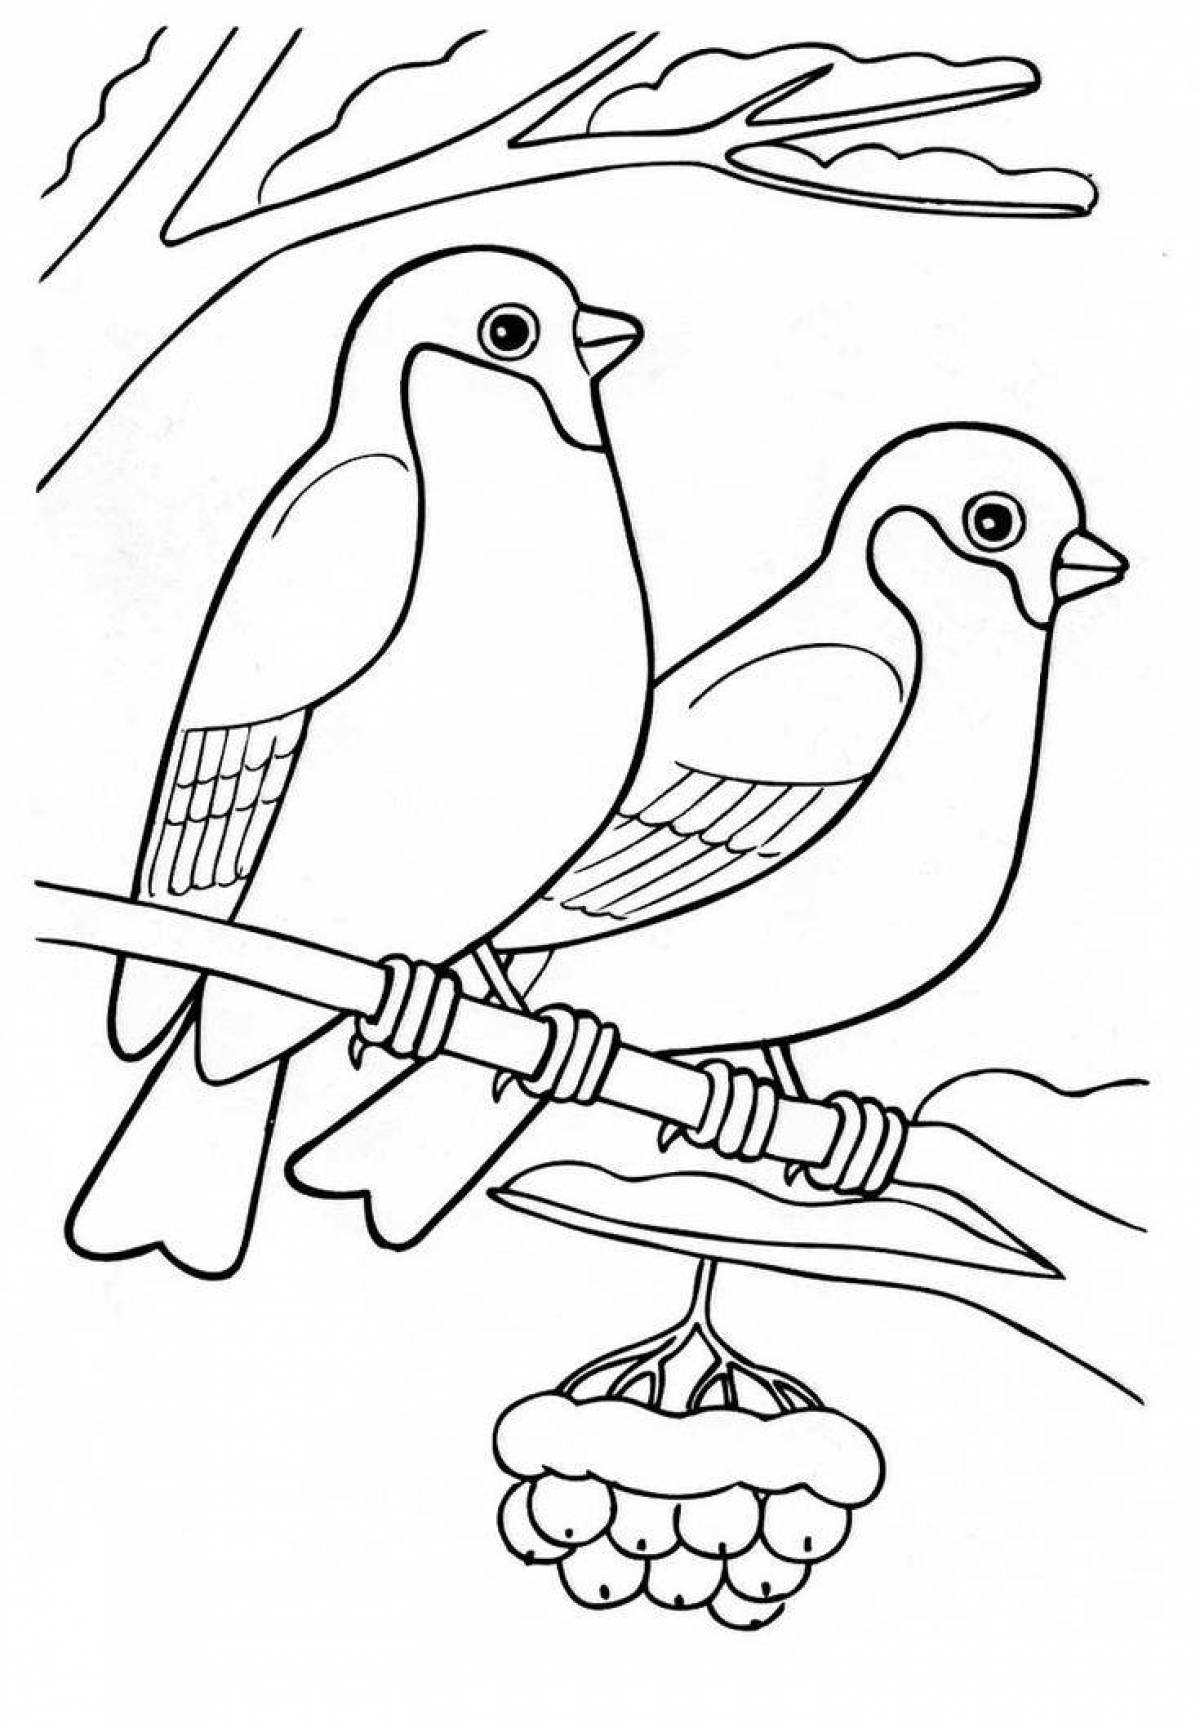 Coloring pages with wintering birds for children 4-5 years old